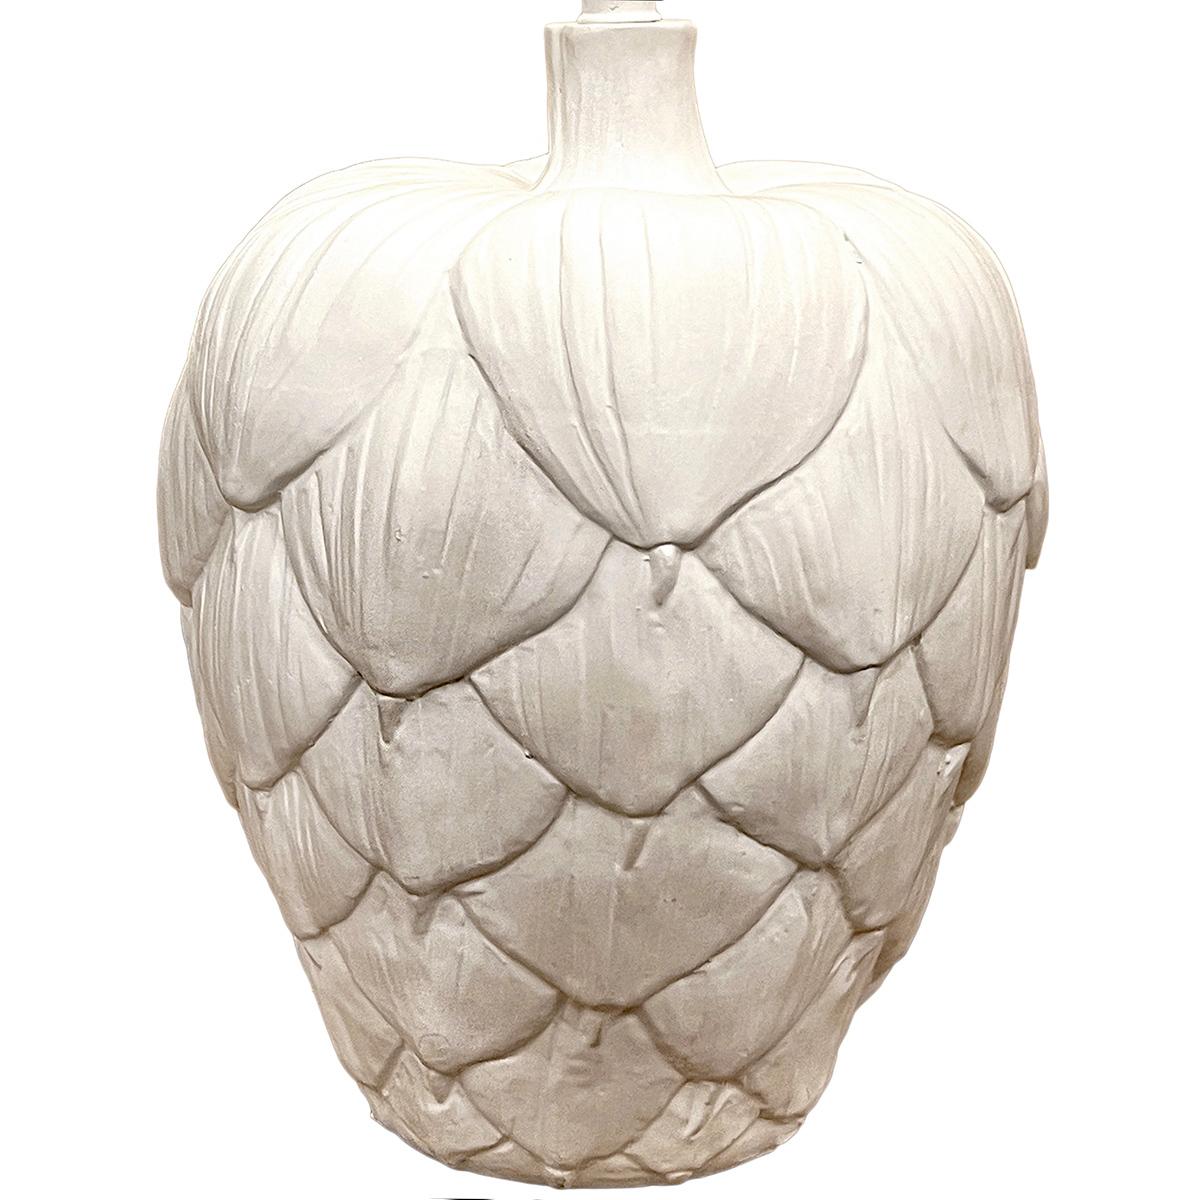 A circa 1960's French figural artichoke table lamp.

Measurements:
Height of body: 17